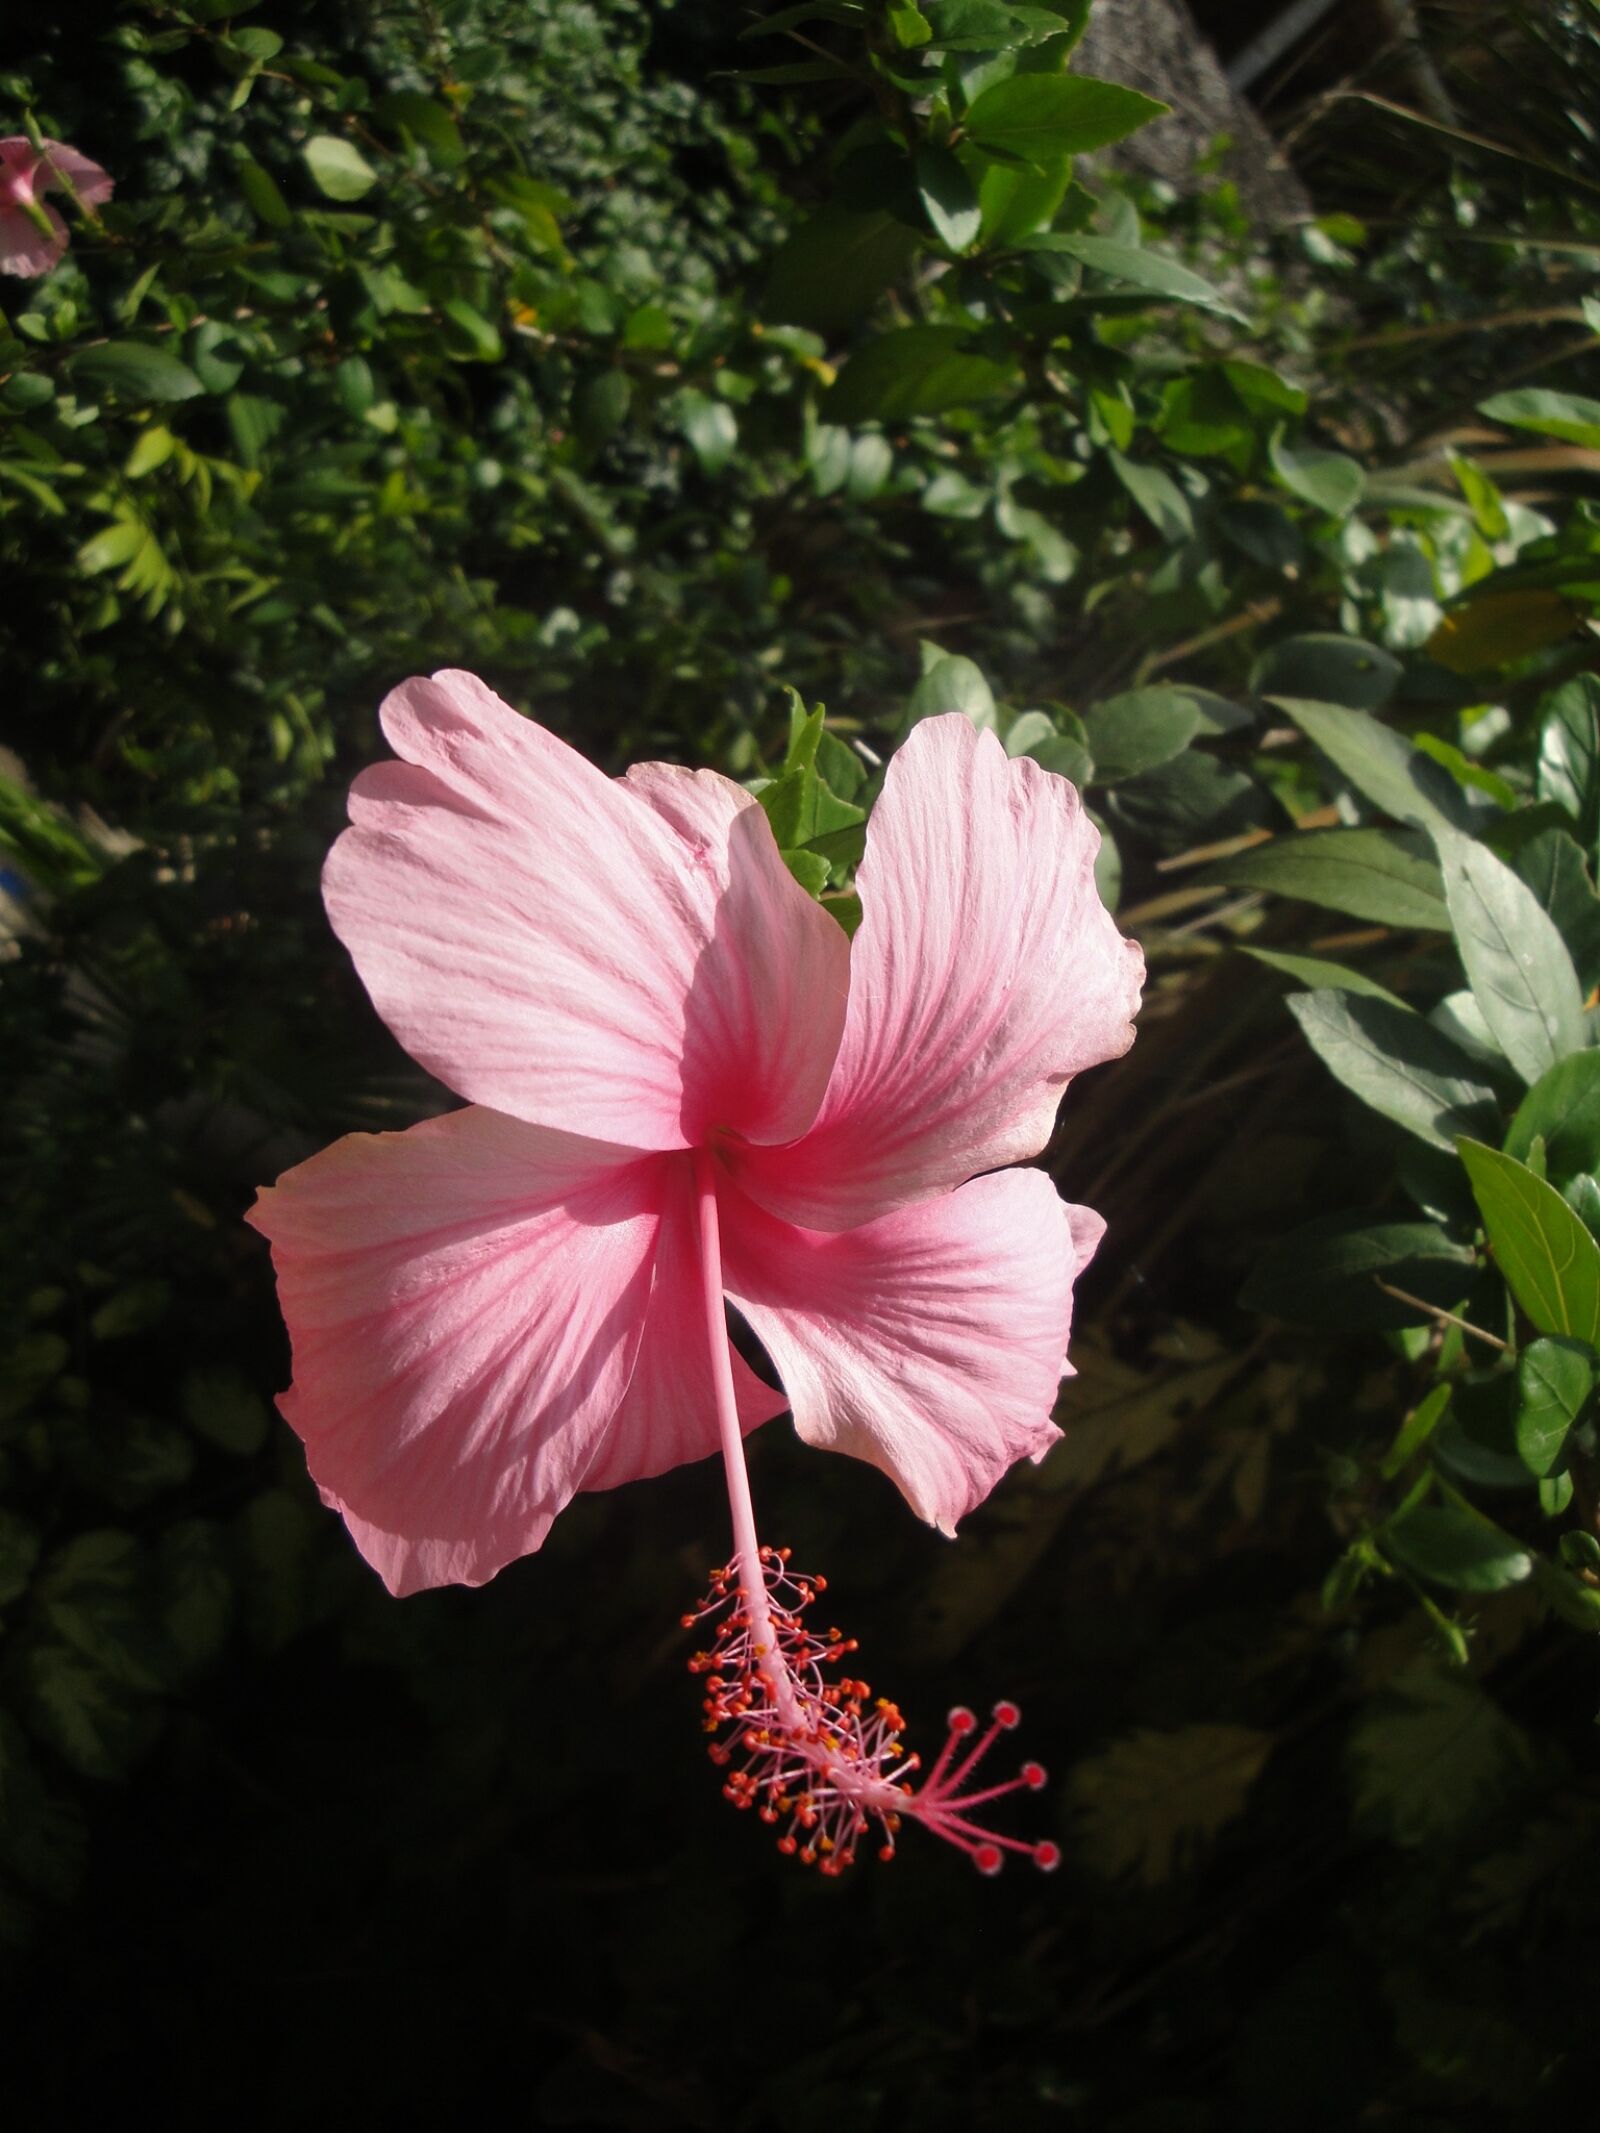 Sony Cyber-shot DSC-W290 sample photo. Hibiscus, the china rose photography